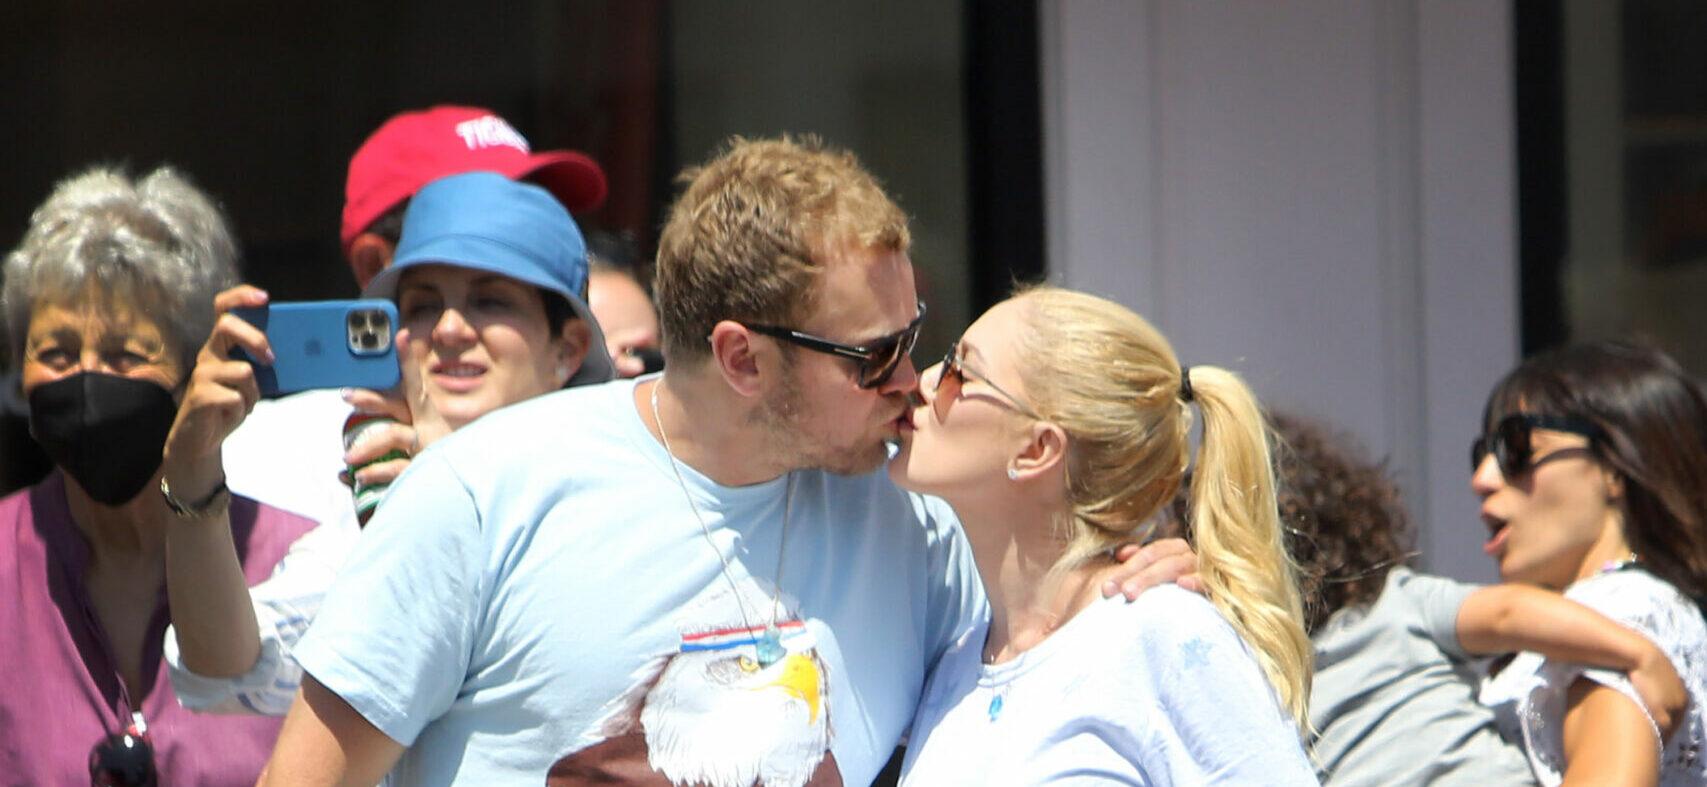 Heidi and Spencer Pratt watch the 4th of July parade